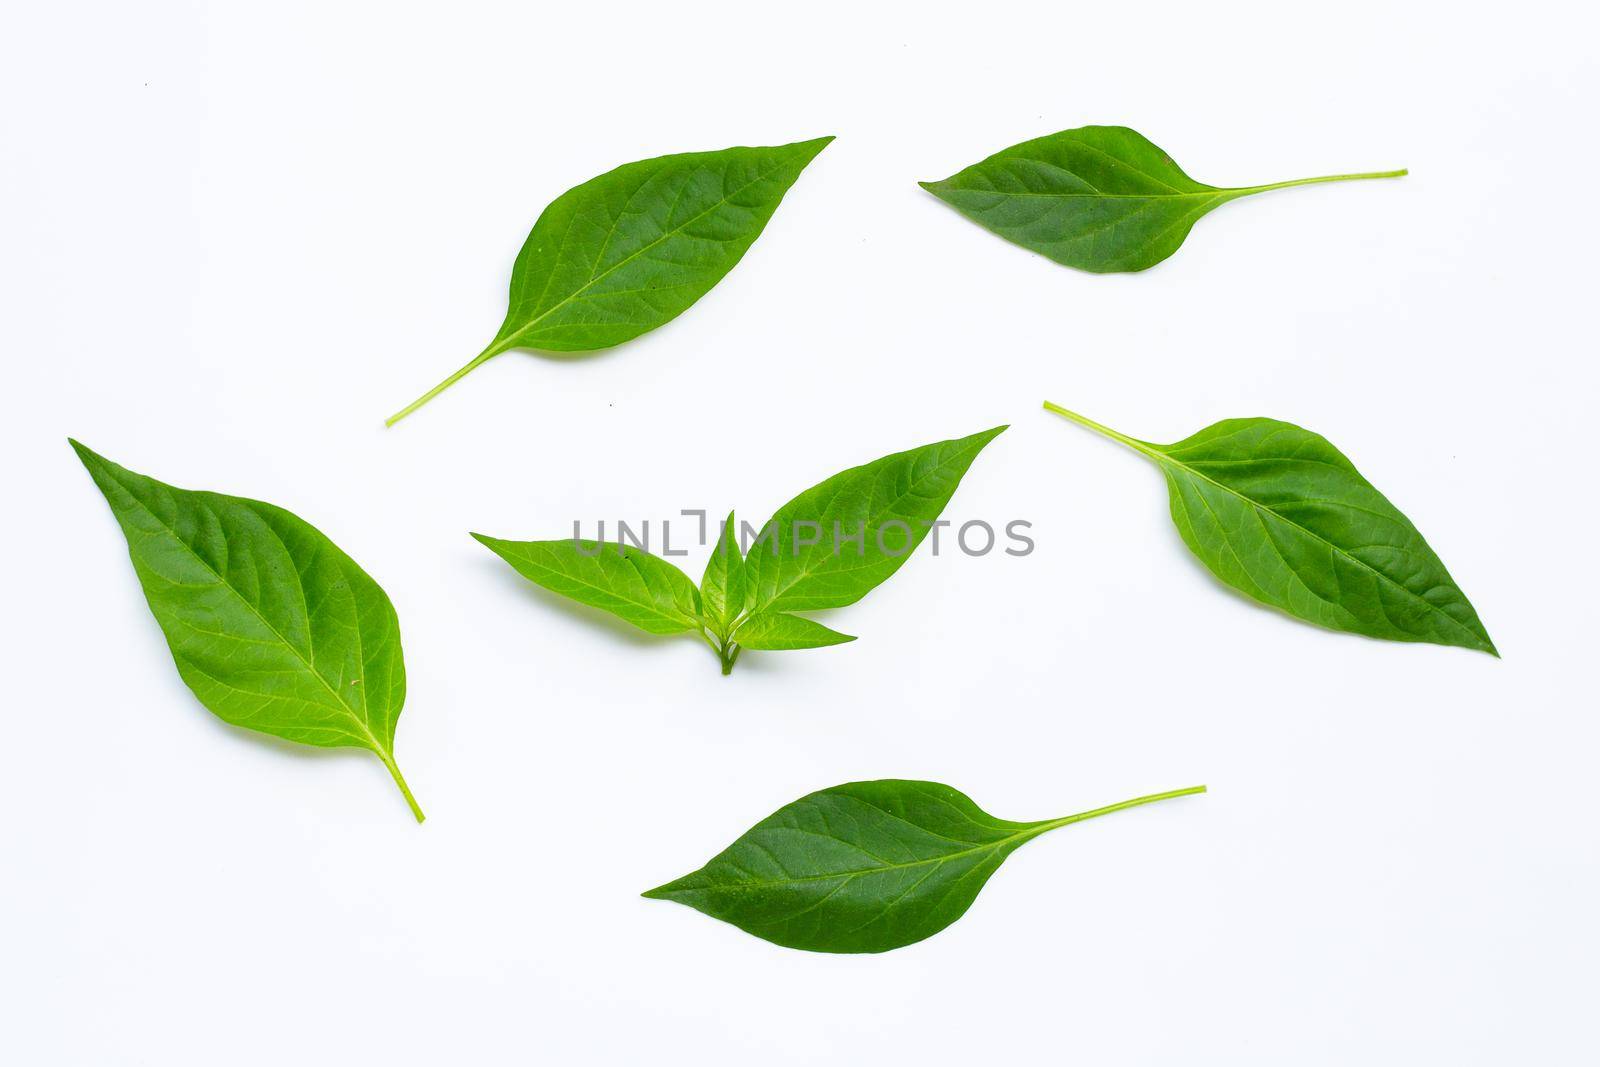 Green leaves of chili peppers on white background.